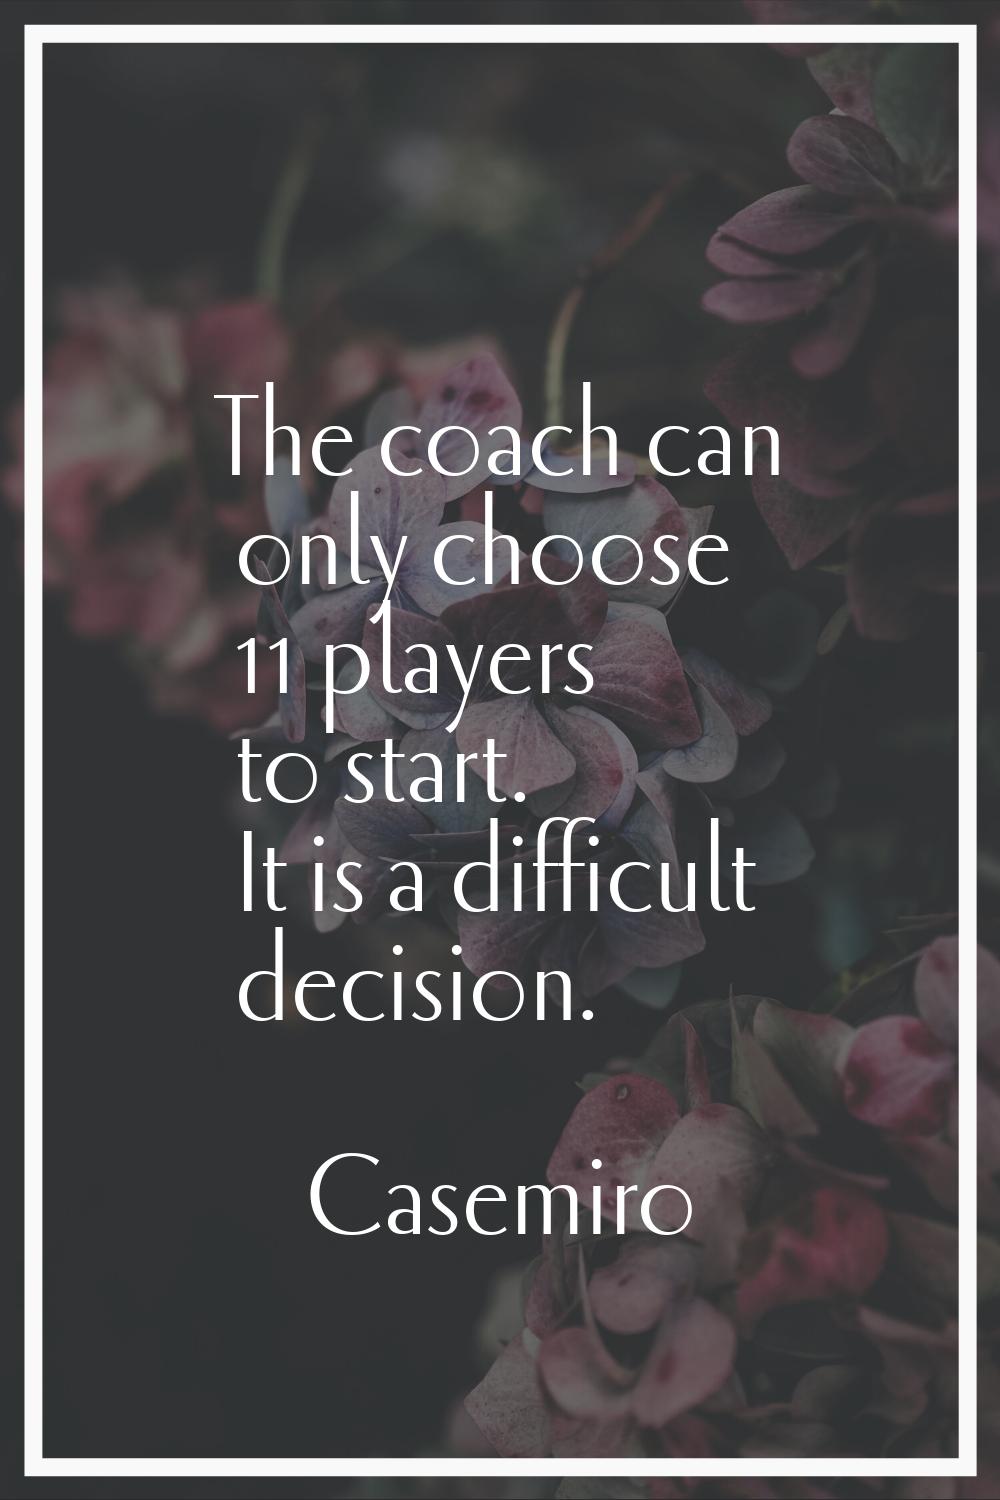 The coach can only choose 11 players to start. It is a difficult decision.